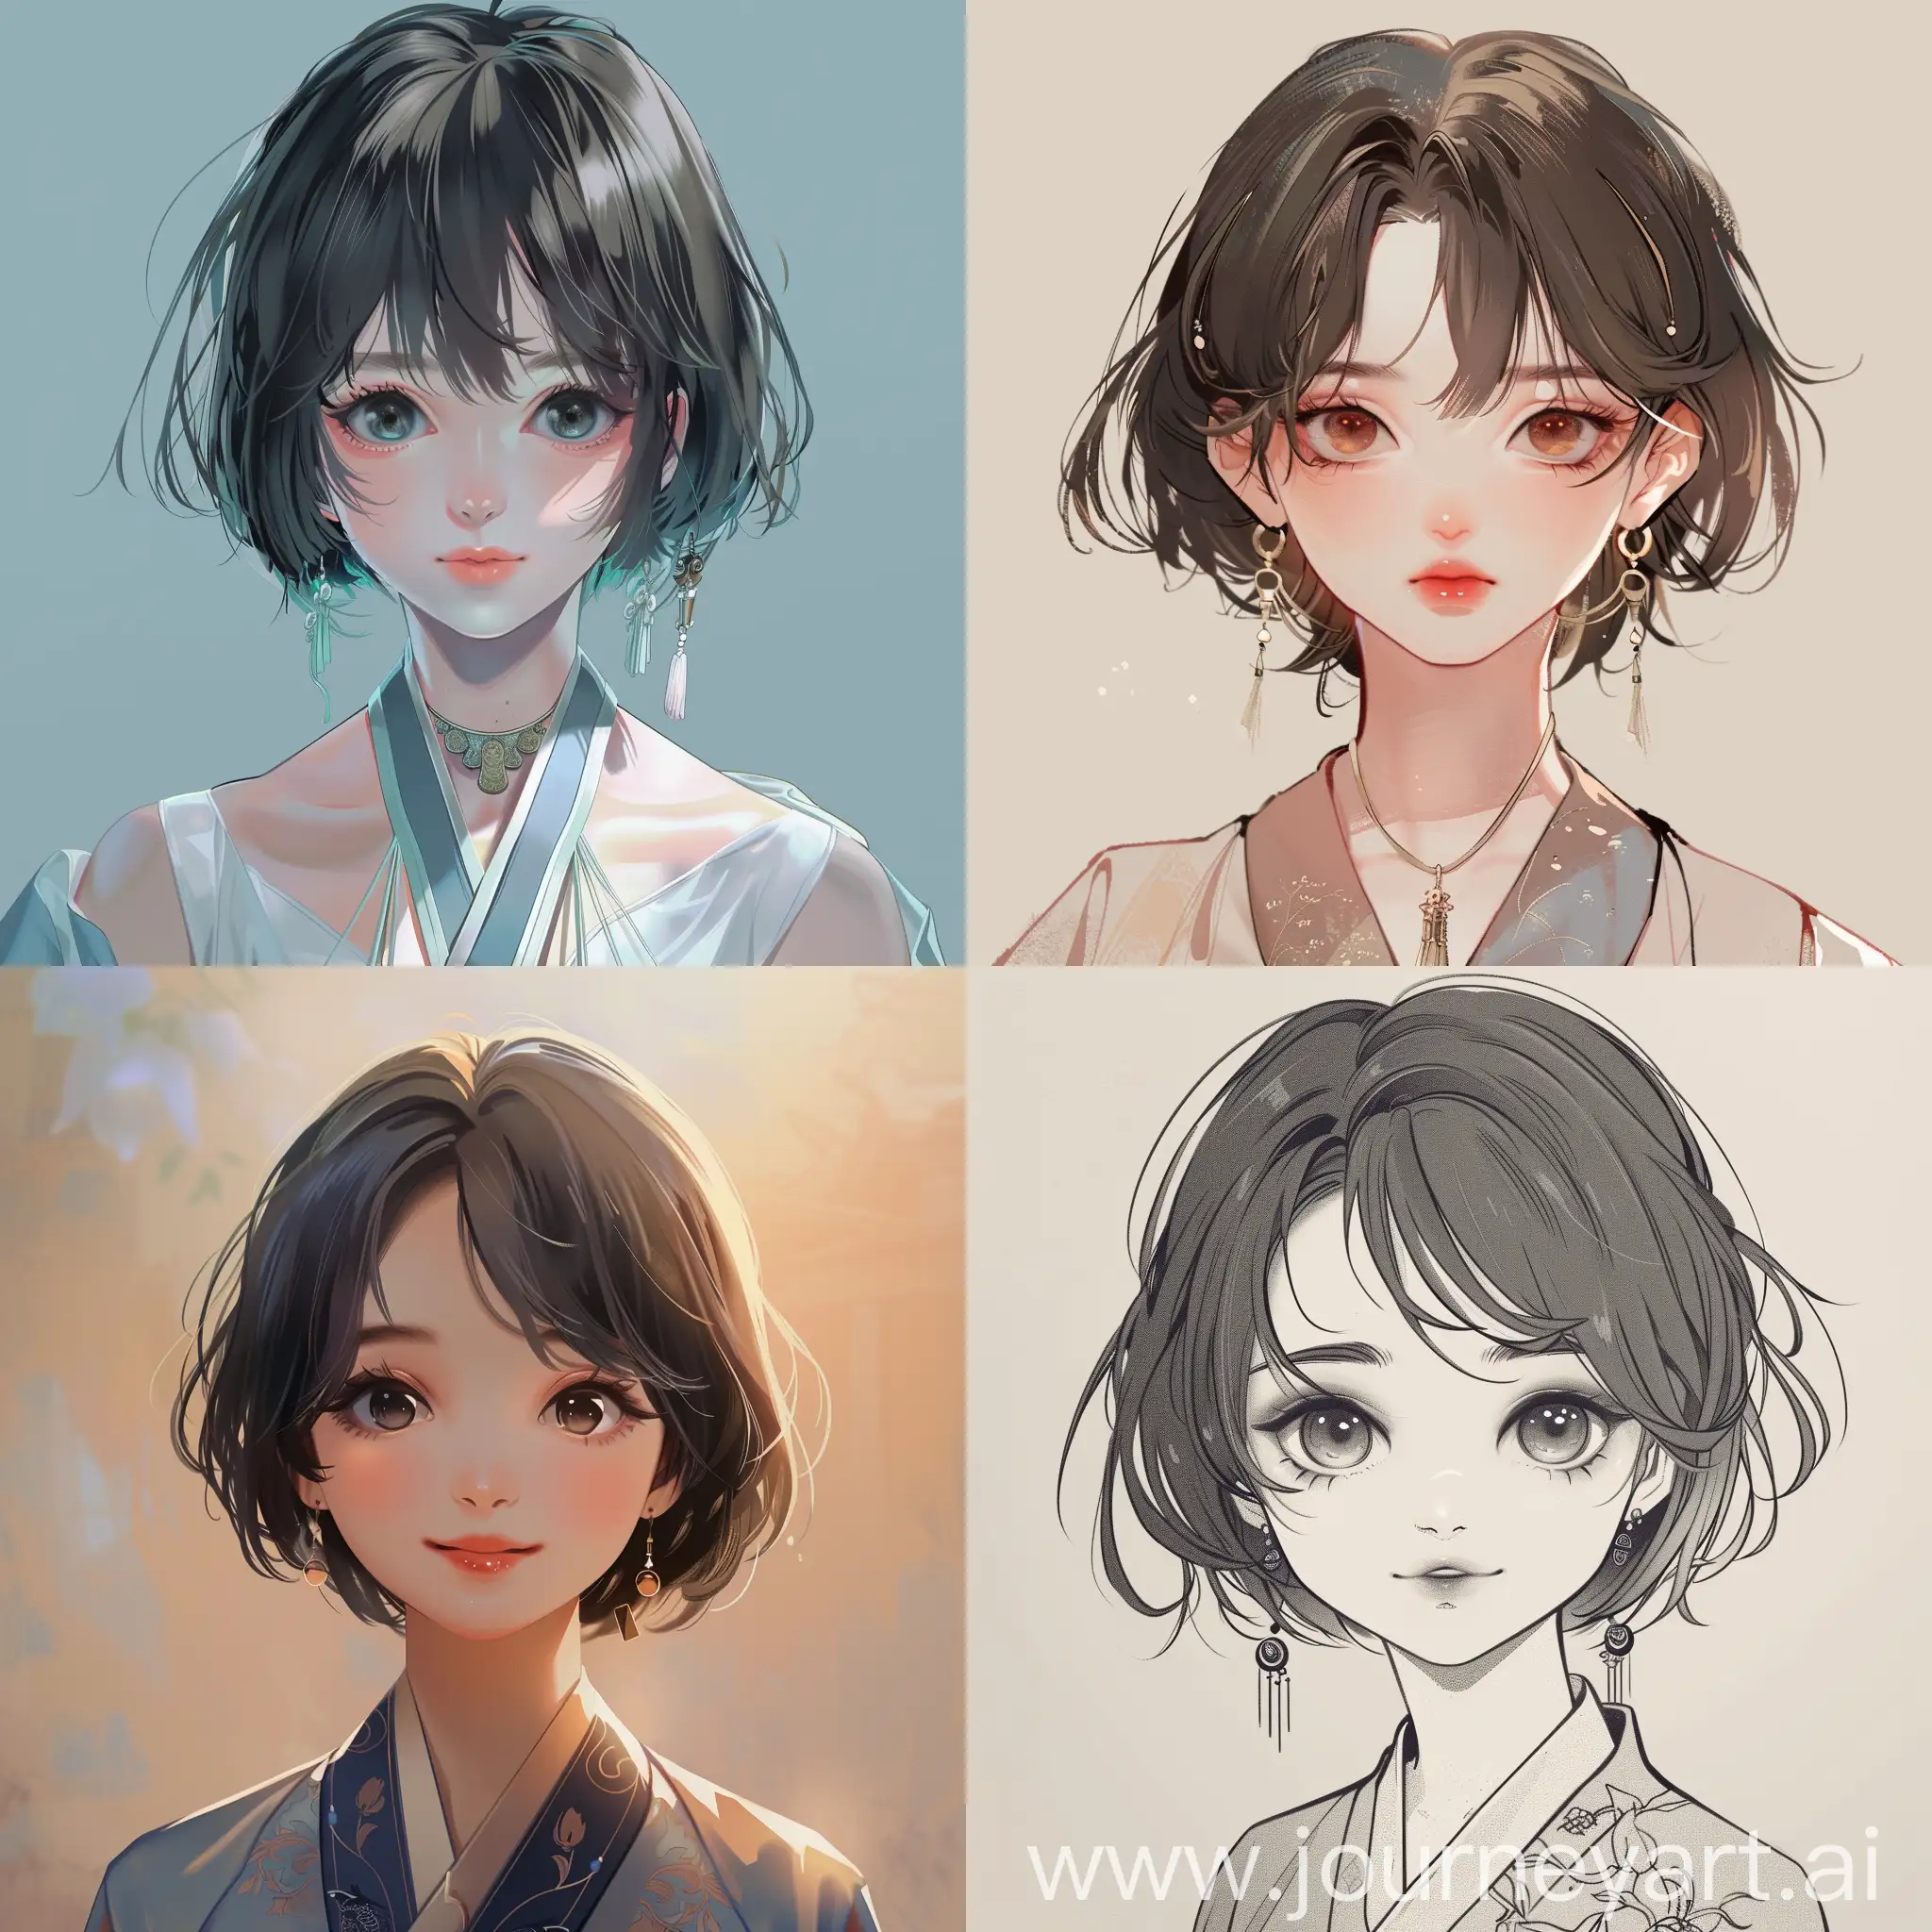 Charming-Korean-Anime-Girl-with-Short-Hair-in-Ancient-Chinese-Style